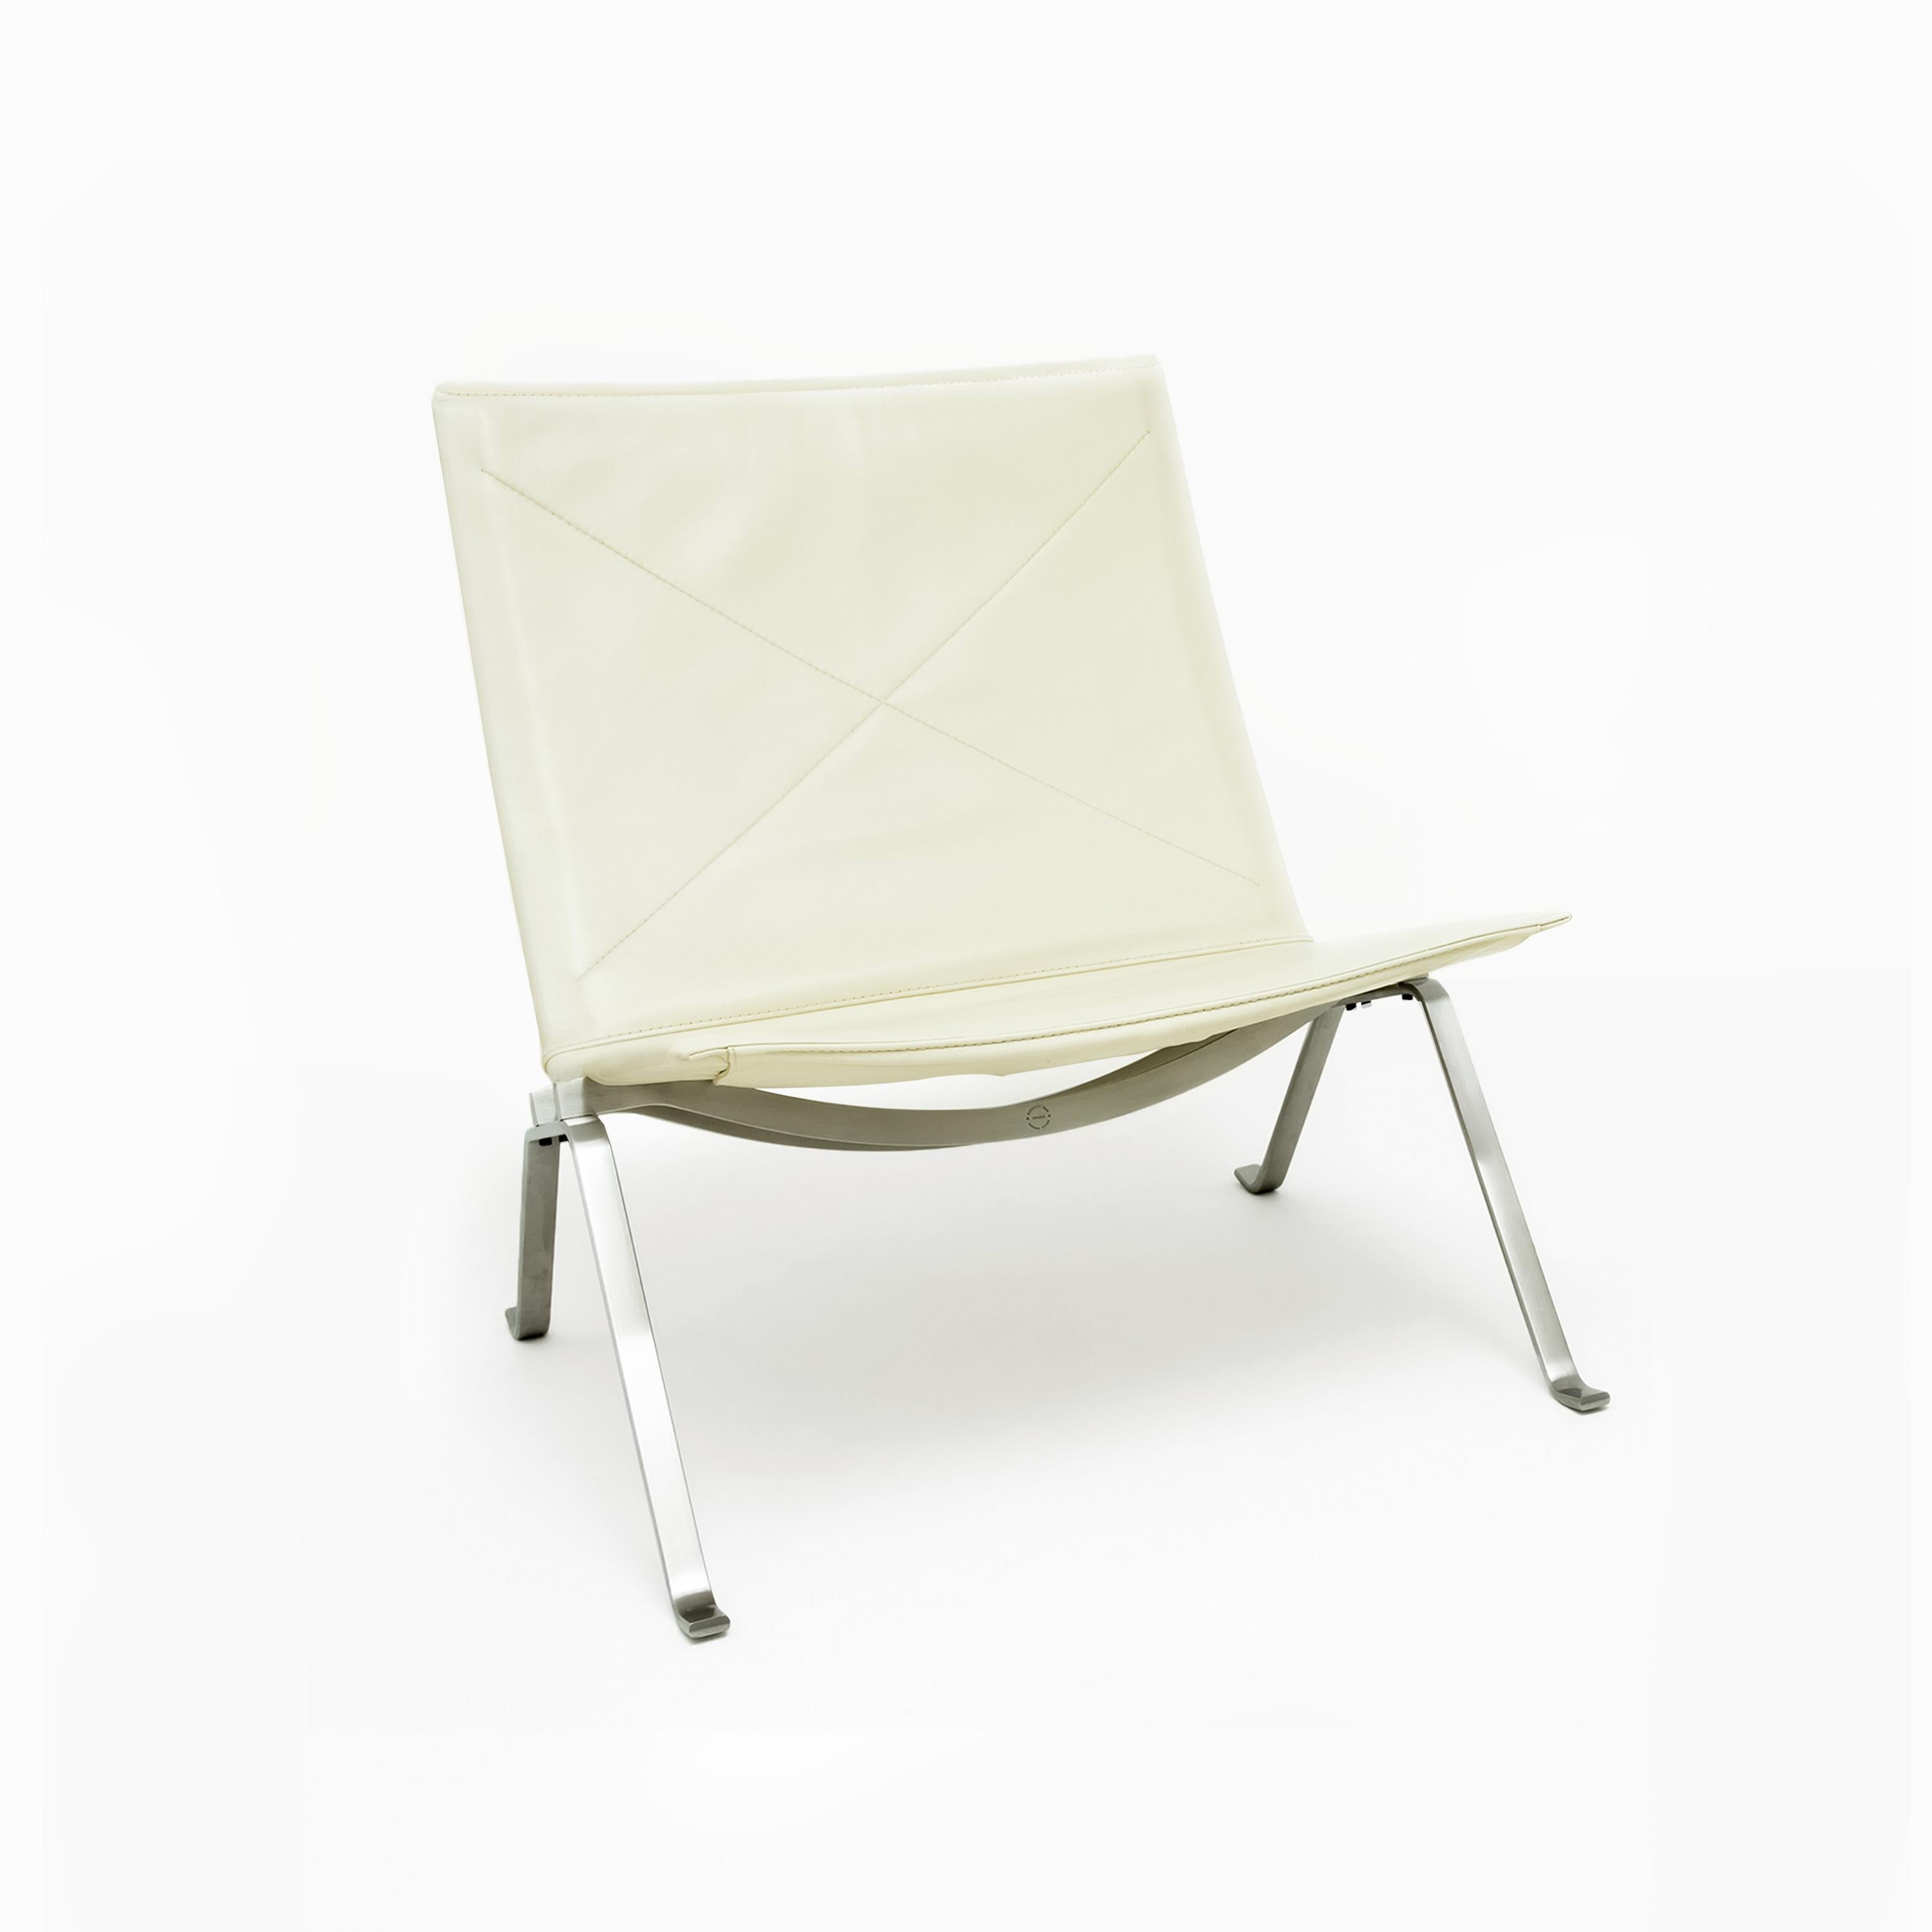 Mid-Century Modern Poul Kjaerholm PK22 Lounge Chair in Cream Leather for Fritz Hansen '2 Available'